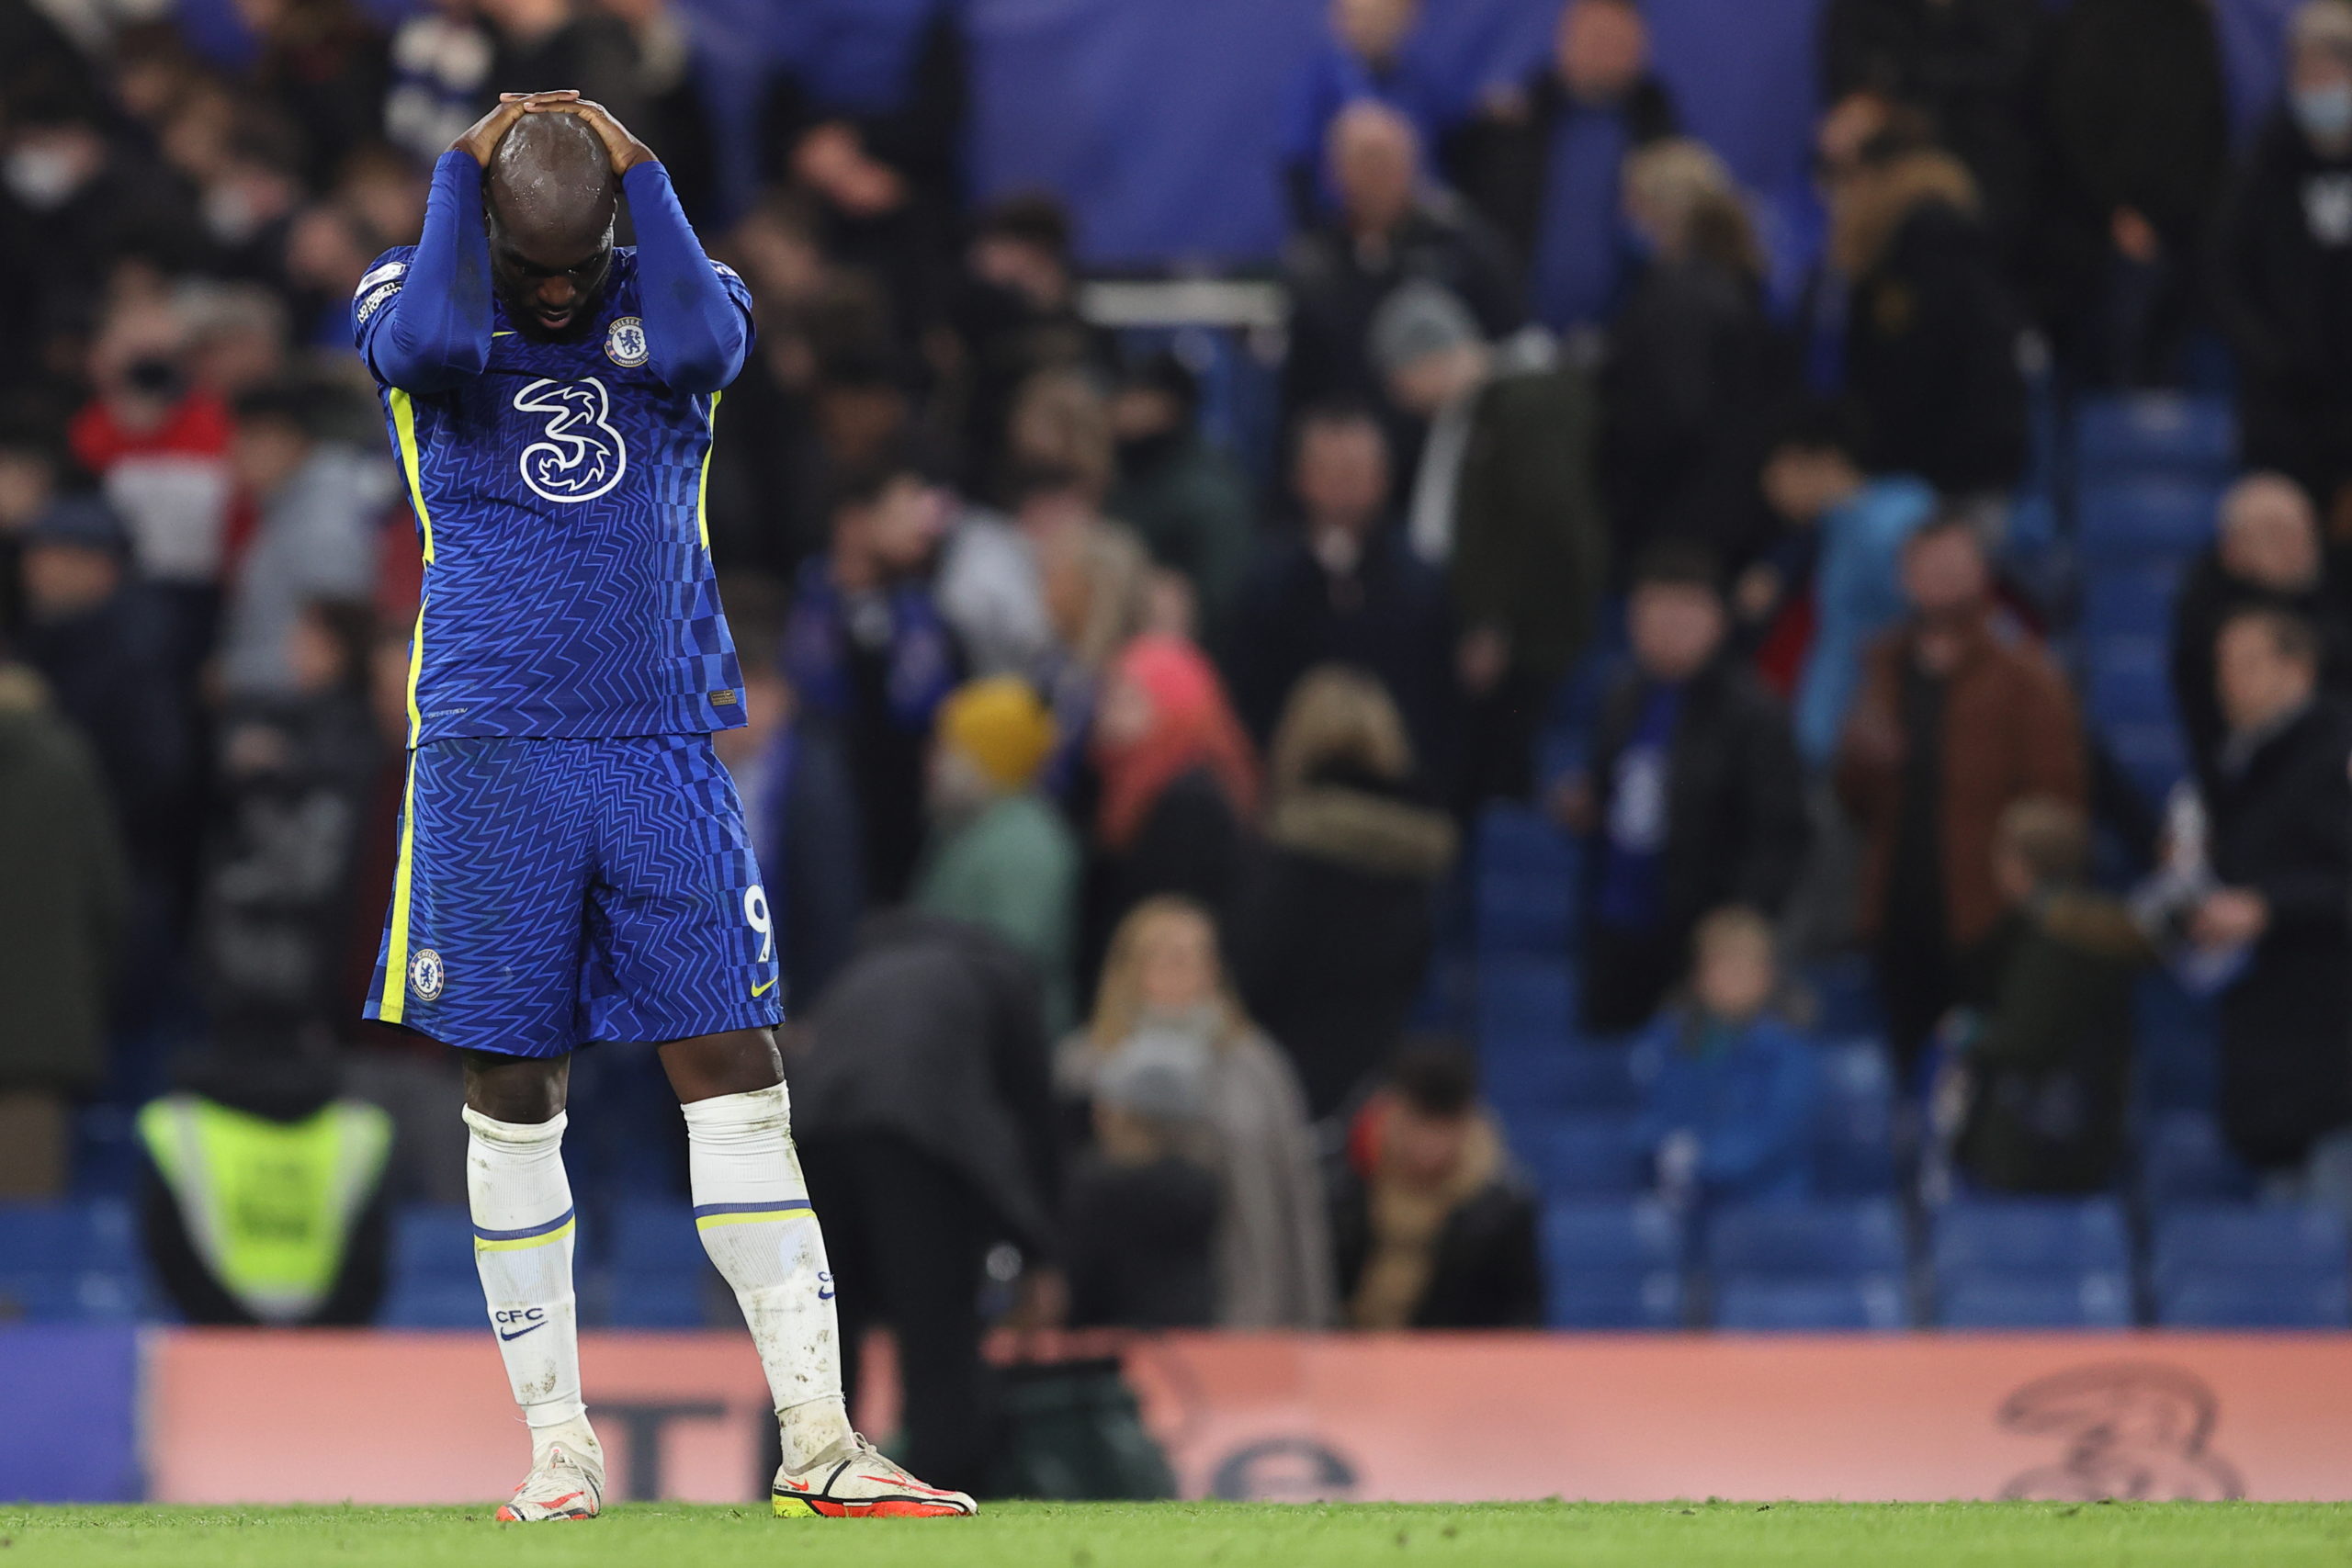 'Nonsense': Craig Burley says there is a better way Lukaku could’ve said sorry to Chelsea fans